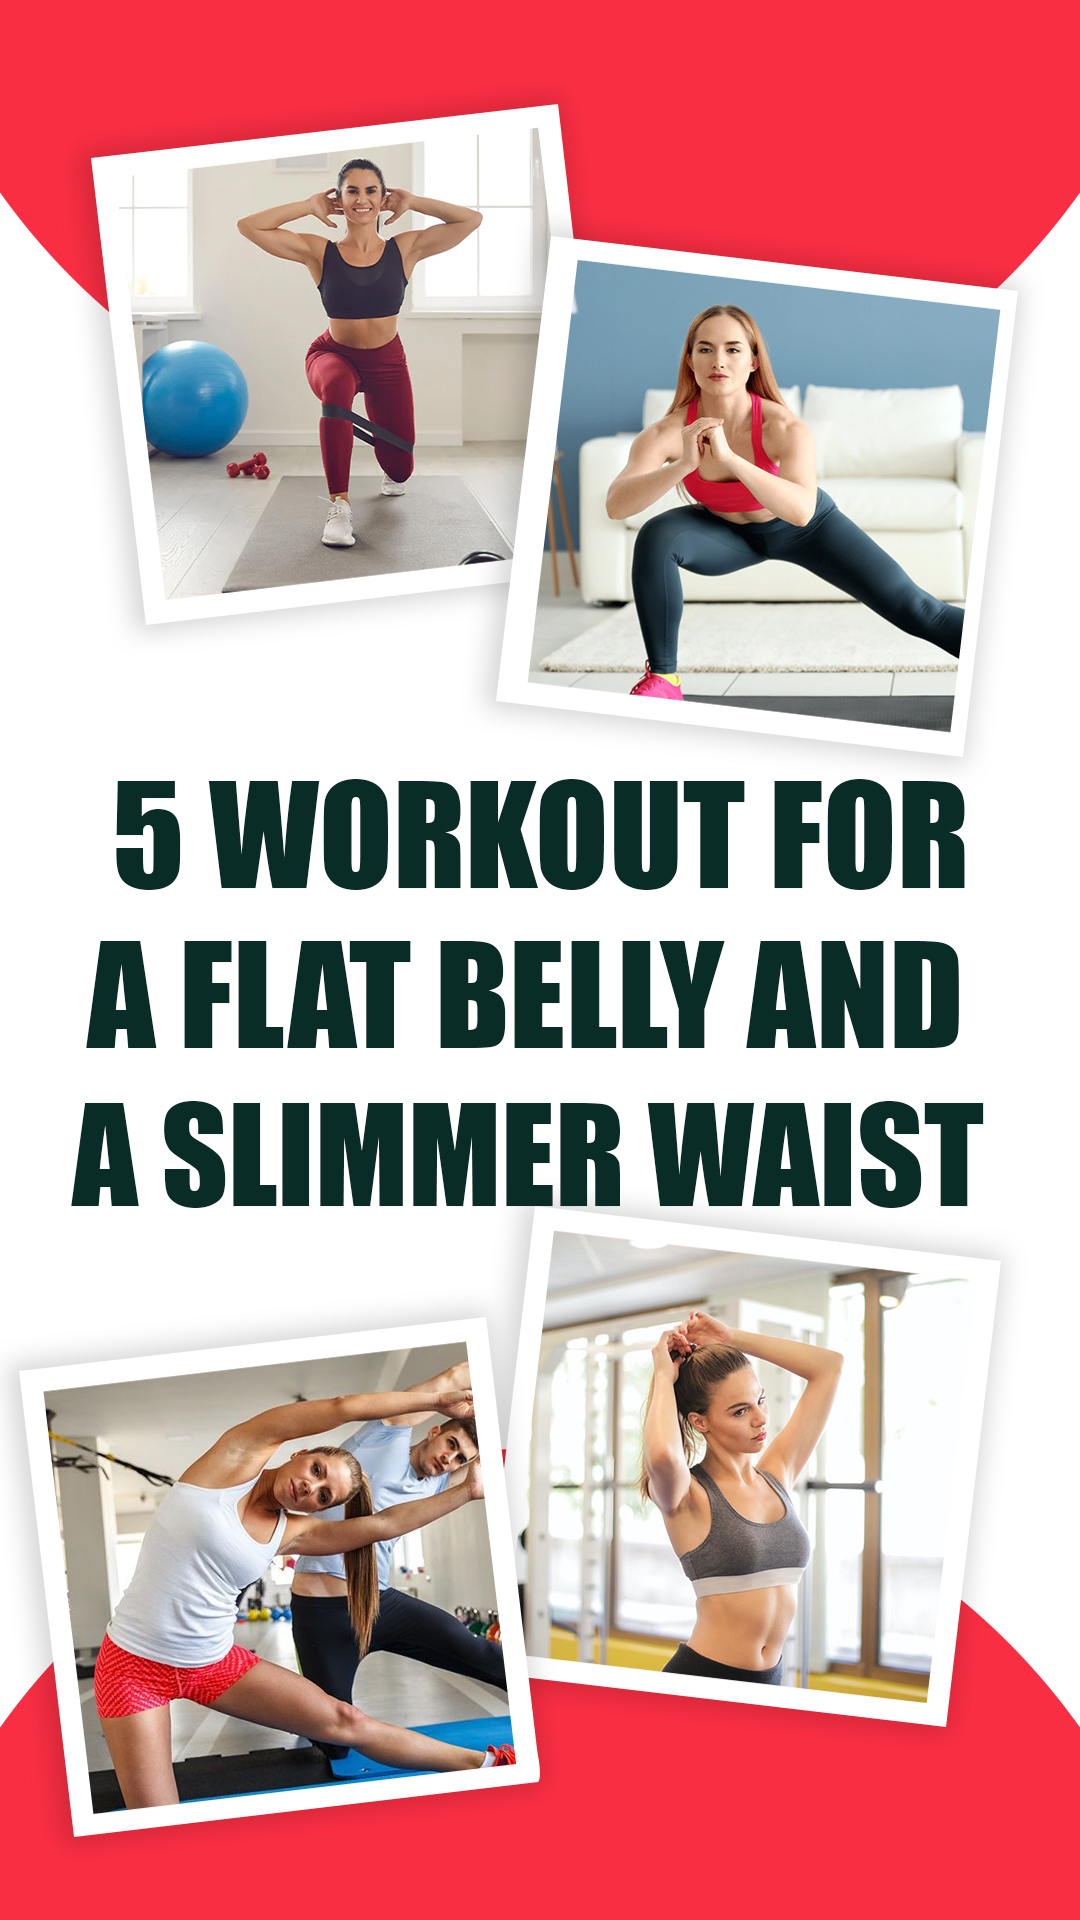 Belly Fat Exercise- 5 Workouts For A Flat Stomach And A Slimmer Waist